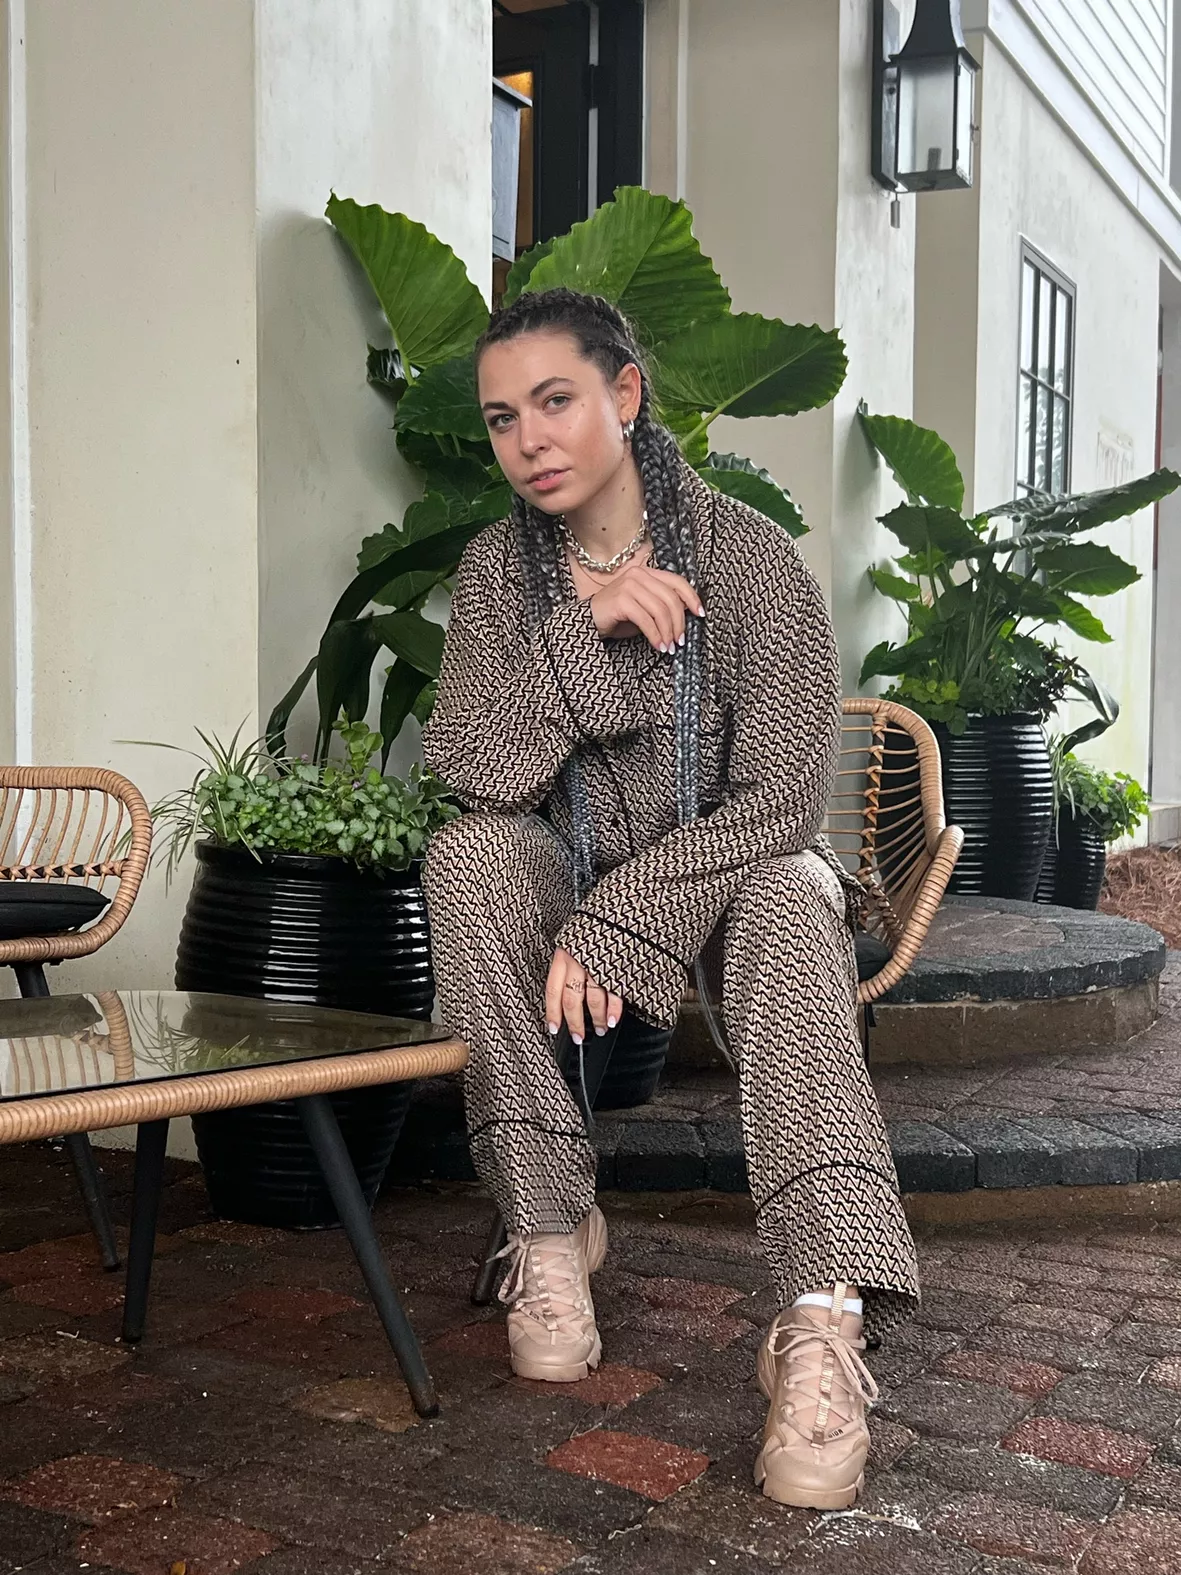 Wearing pajamas all day long is the newest trend in fashion